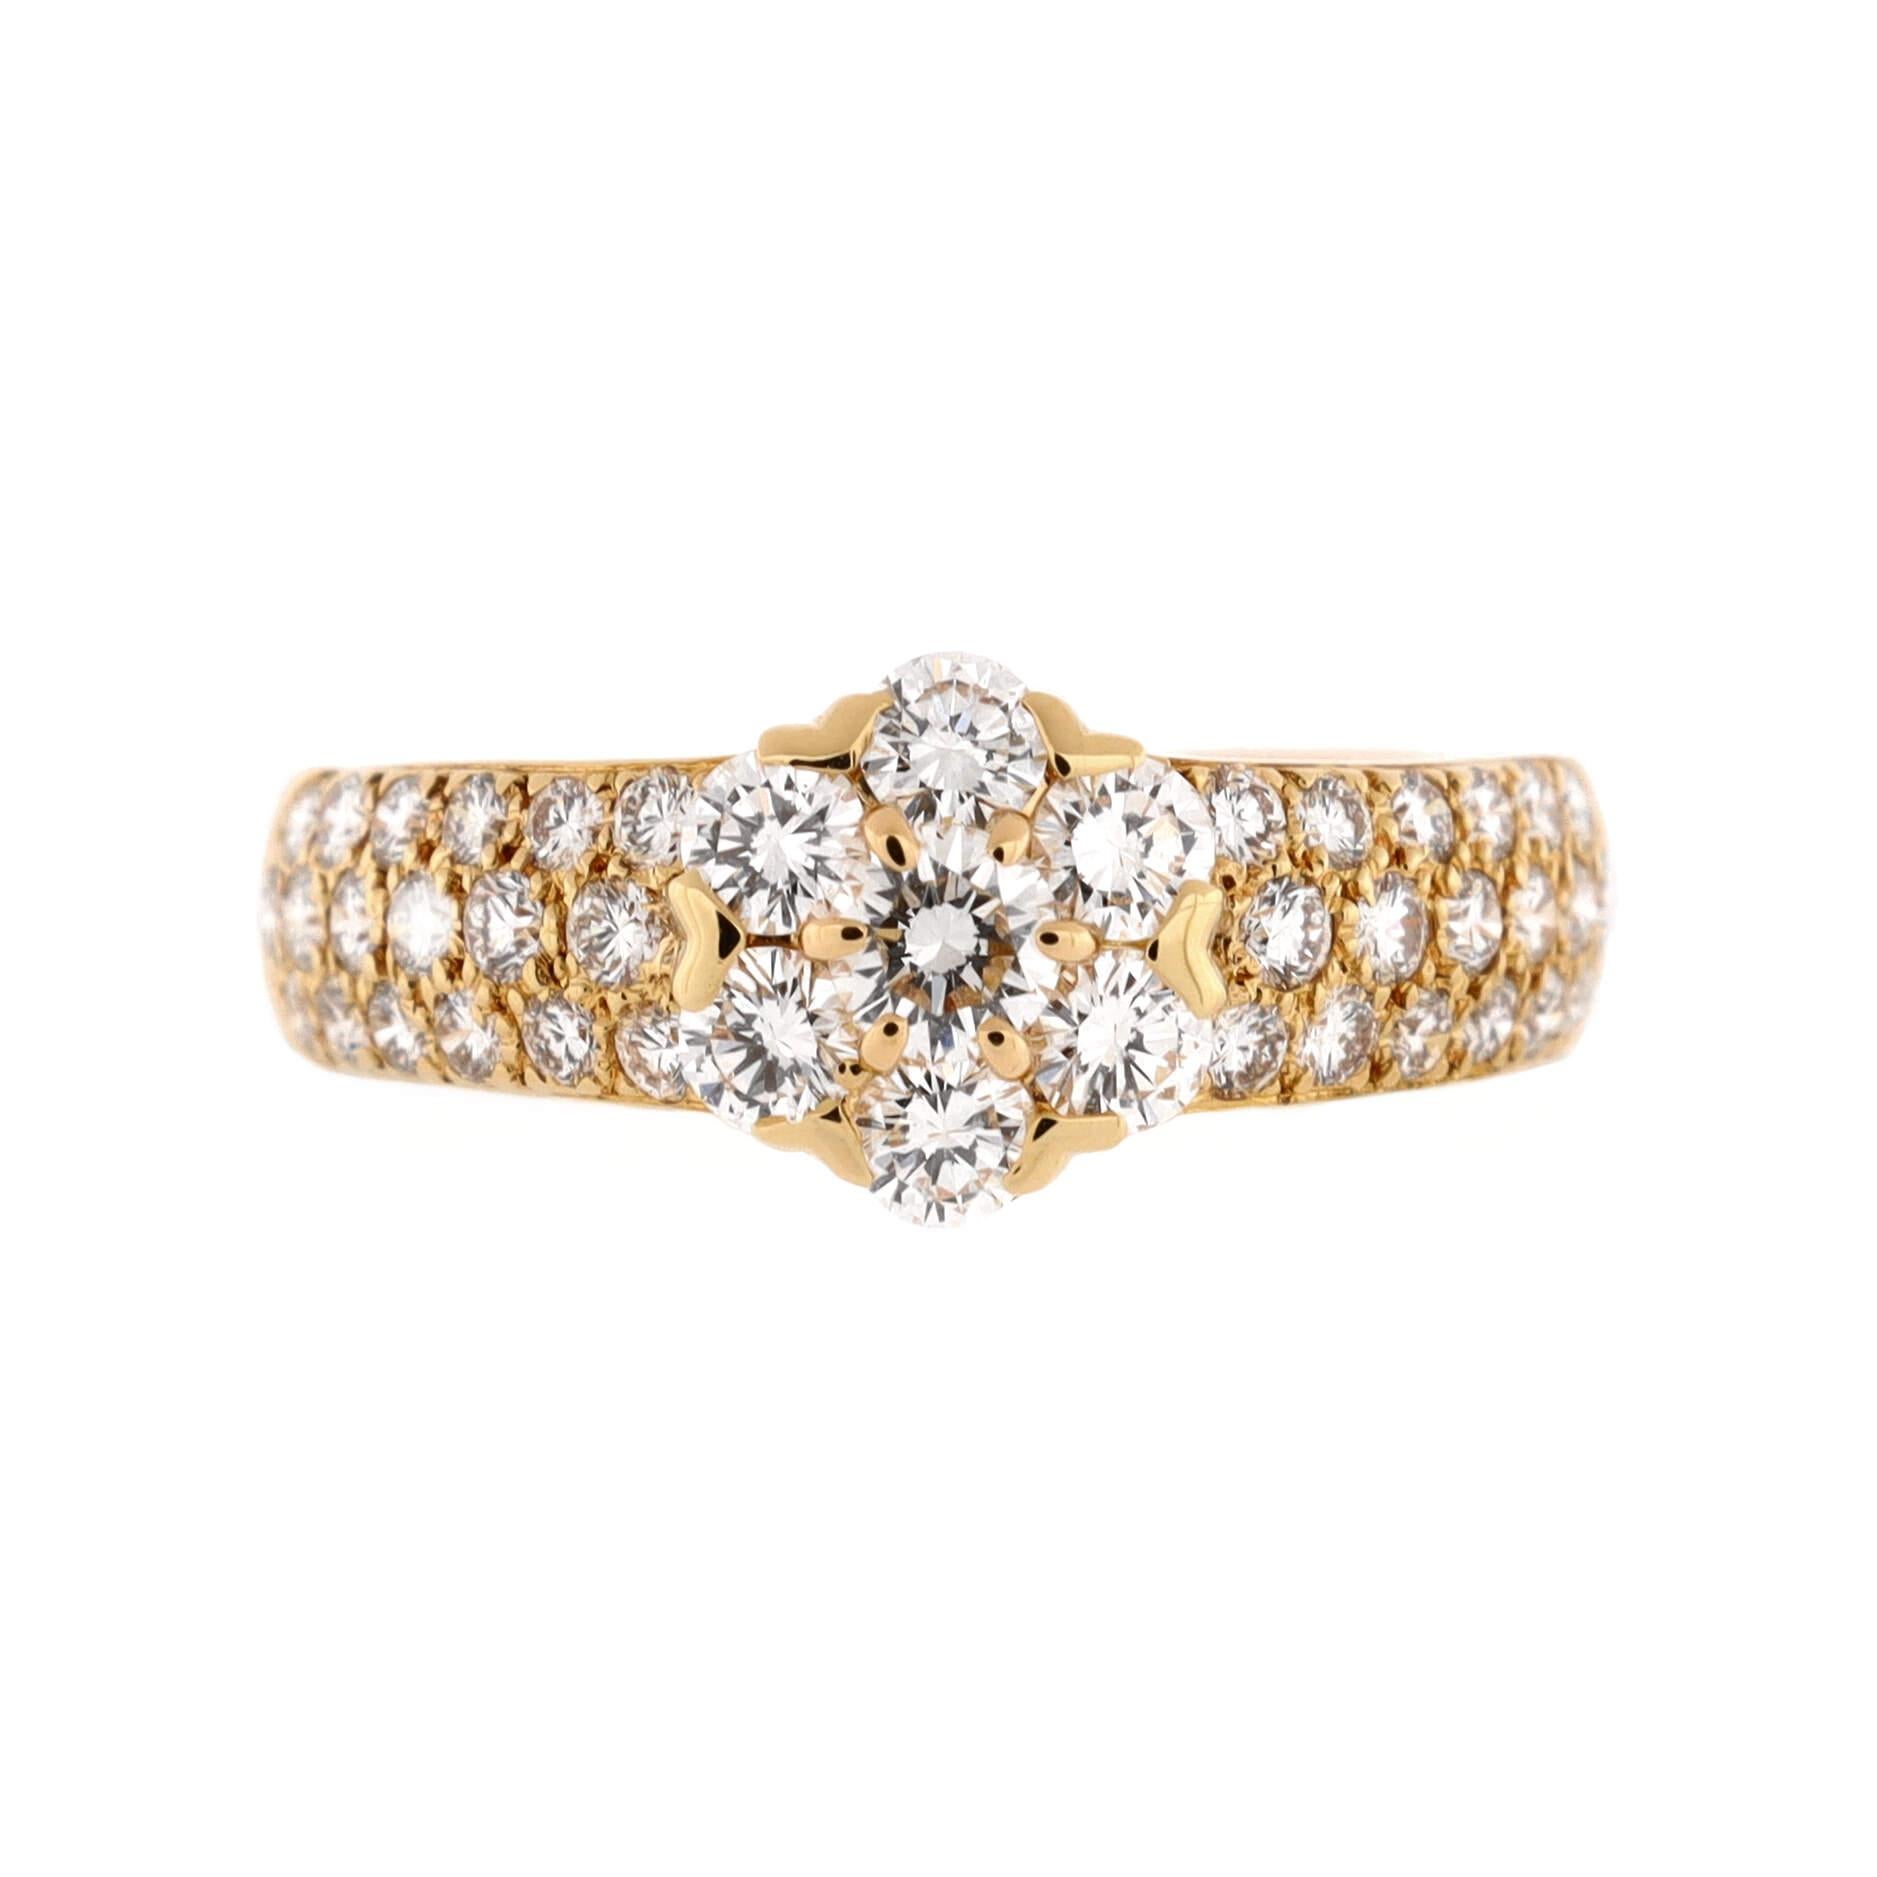 Condition: Moderate wear throughout with signs of resizing.
Accessories: No Accessories
Measurements: Size: 4.75 - 49, Width: 3.35 mm
Designer: Van Cleef & Arpels
Model: Fleurette Three Row Ring 18K Yellow Gold and Diamonds
Exterior Color: Yellow